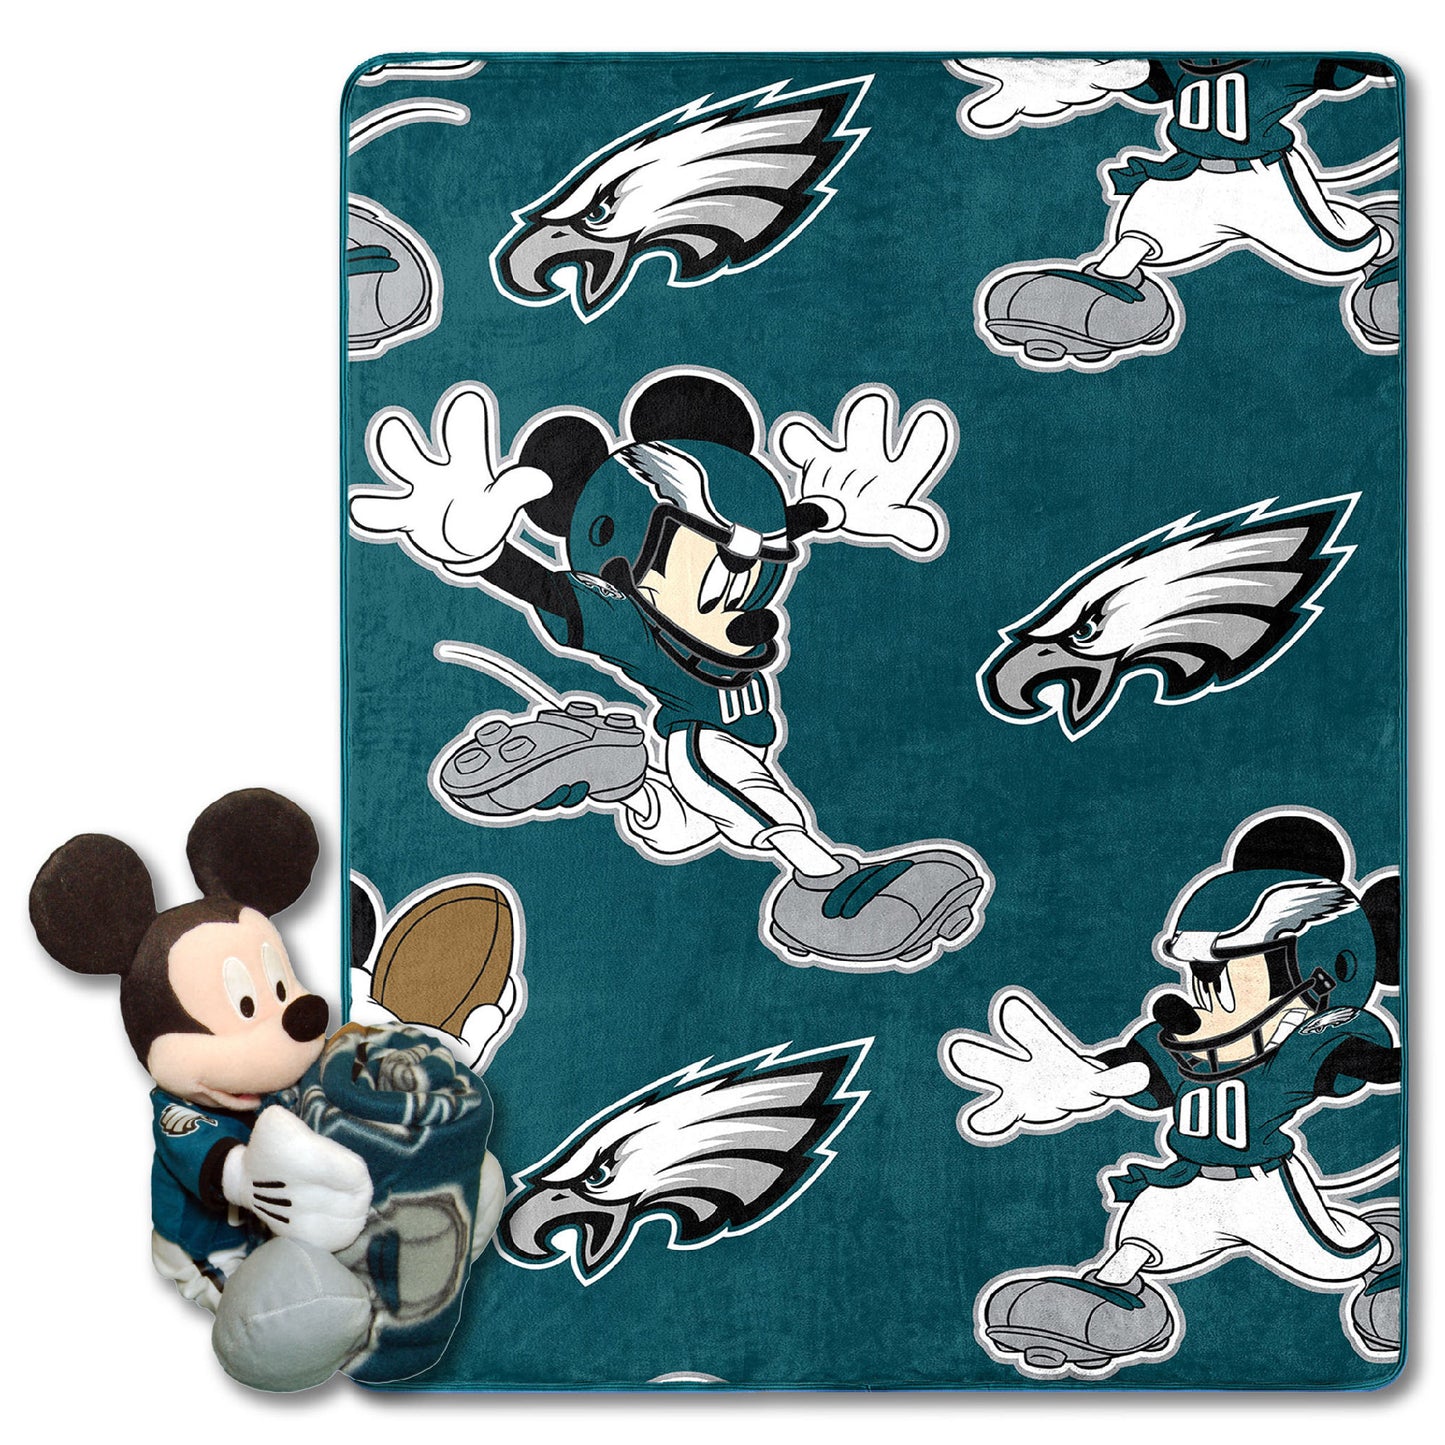 Eagles OFFICIAL NFL & Disney's Mickey Mouse Character Hugger Pillow & Silk Touch Throw Set;  40" x 50"